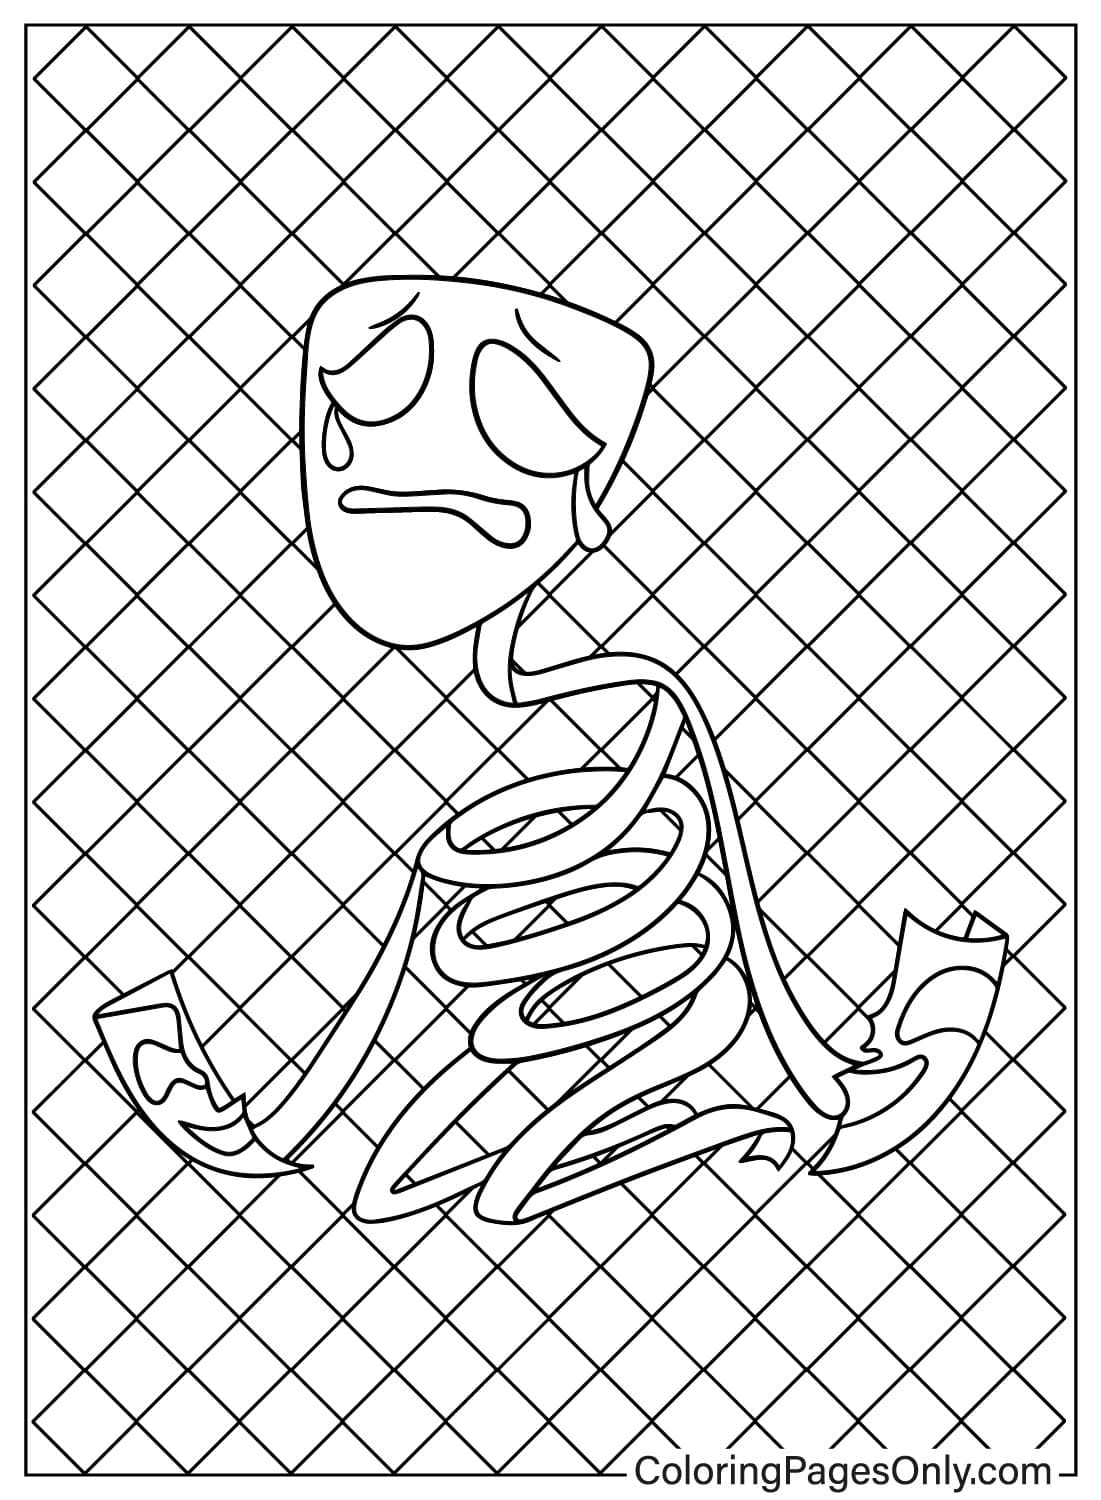 Images Gangle Coloring Page from Gangle